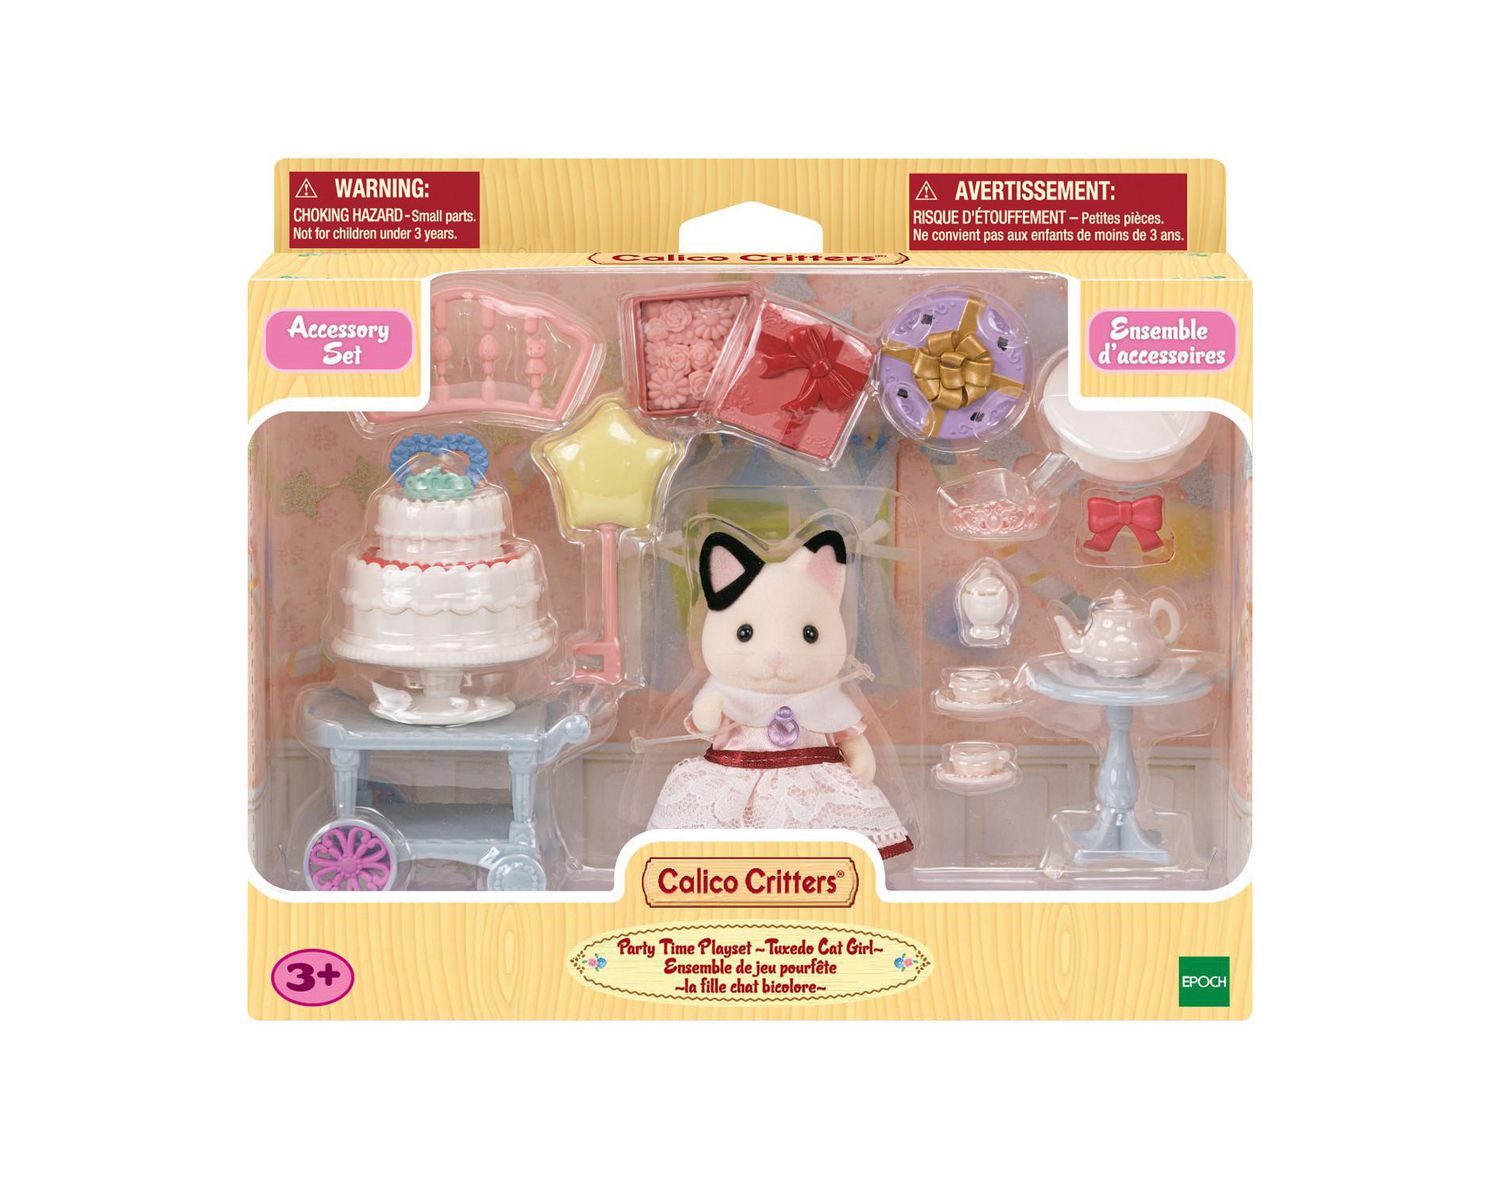 Calico Critters Tuxedo Cat Girl's Party Time Playset, Dollhouse